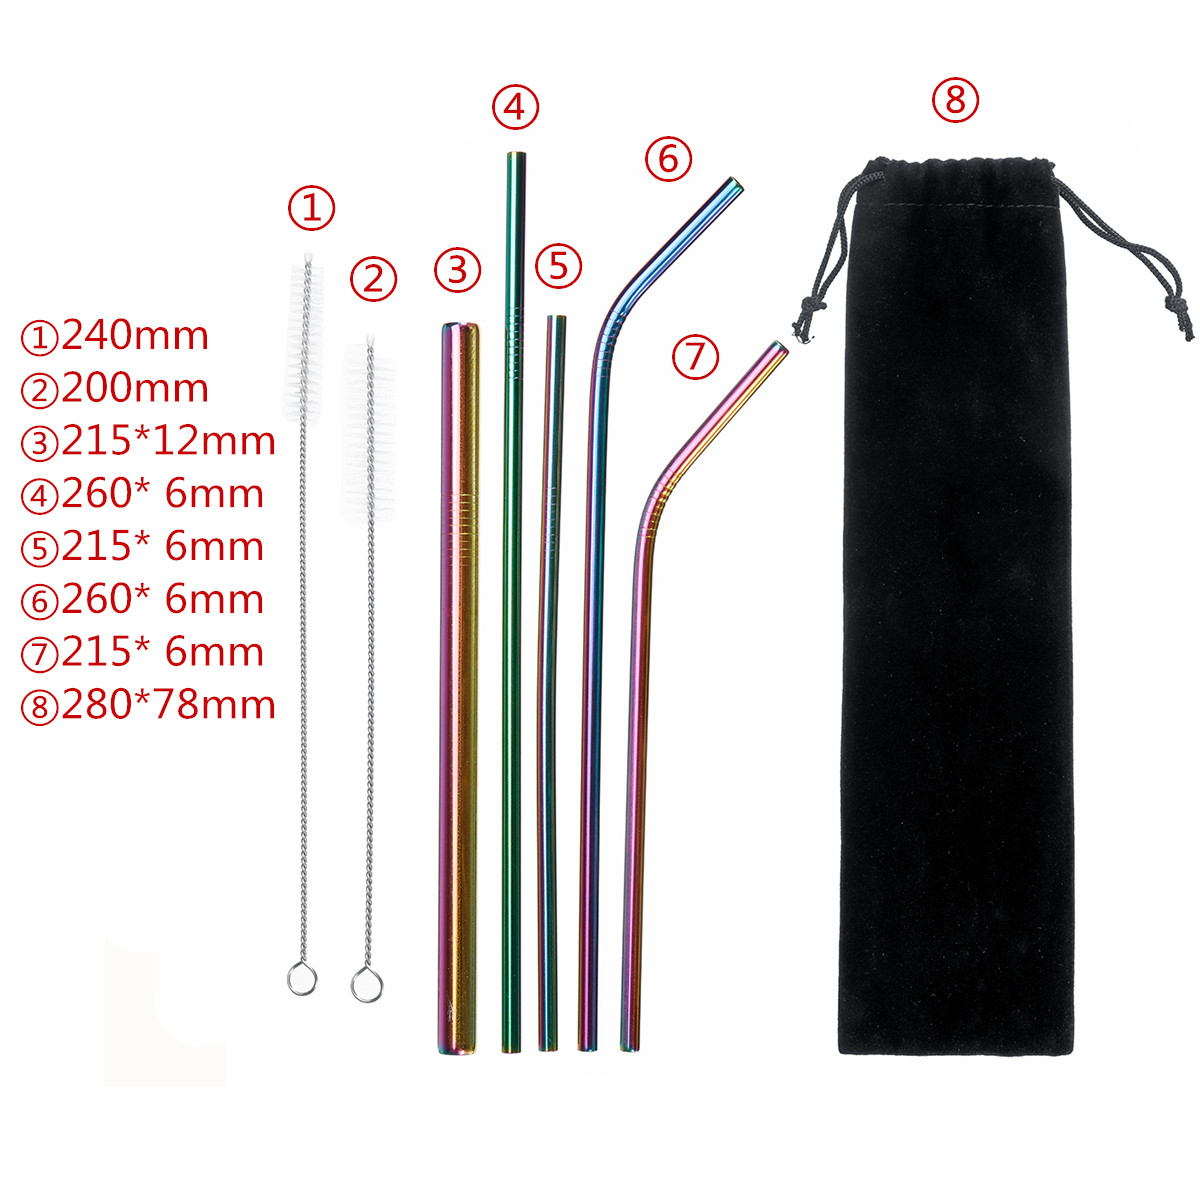 Portable-Metal-Straw-Set-304-Stainless-Steel-Straws-Reusable-Metal-Drinking-Straws-With-Cleaning-Bru-1532046-1